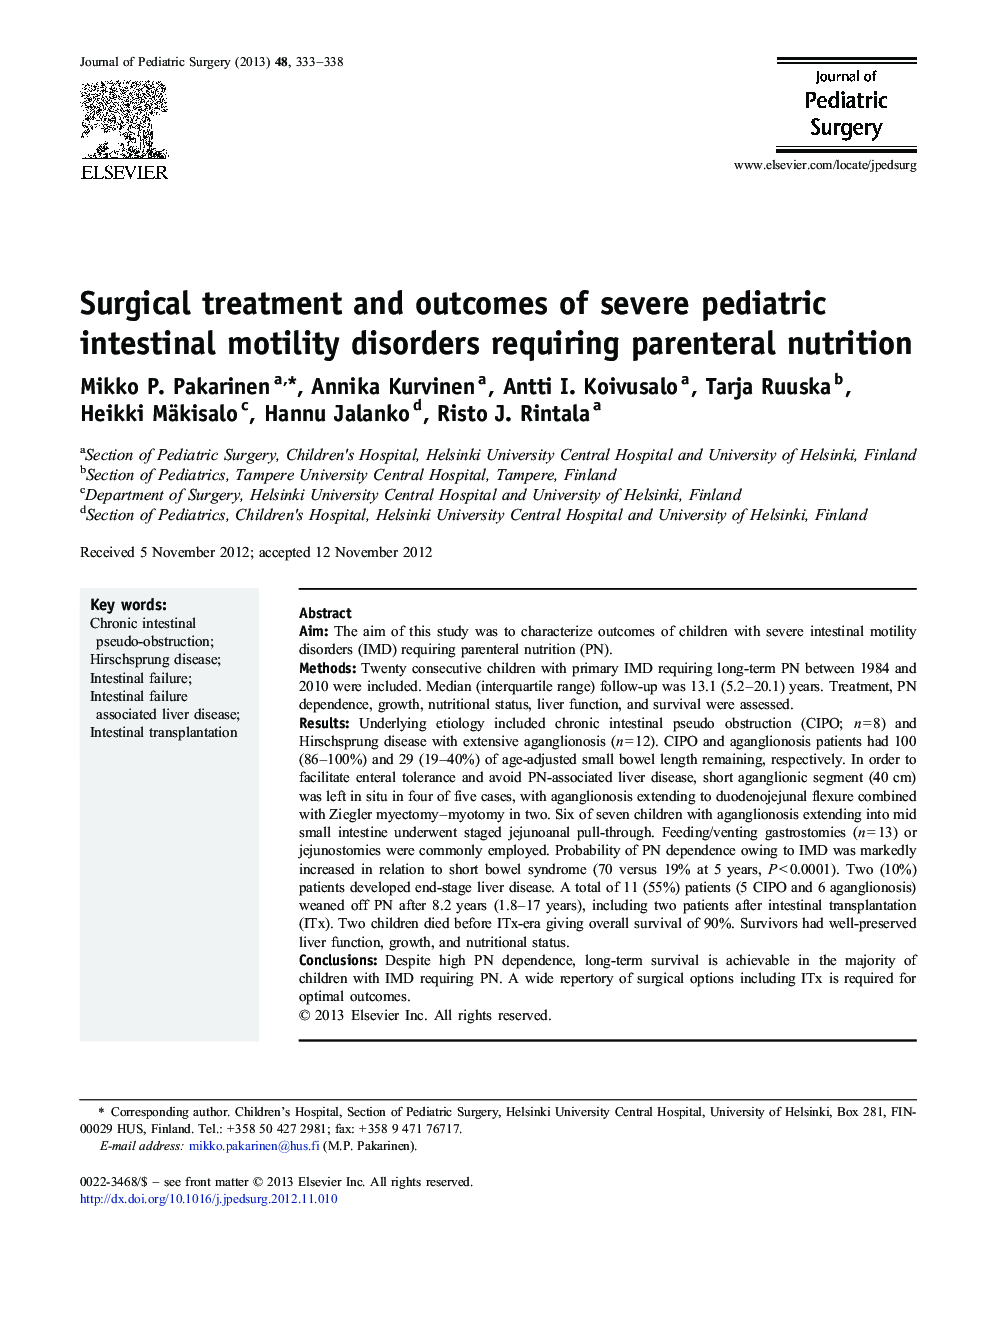 Surgical treatment and outcomes of severe pediatric intestinal motility disorders requiring parenteral nutrition